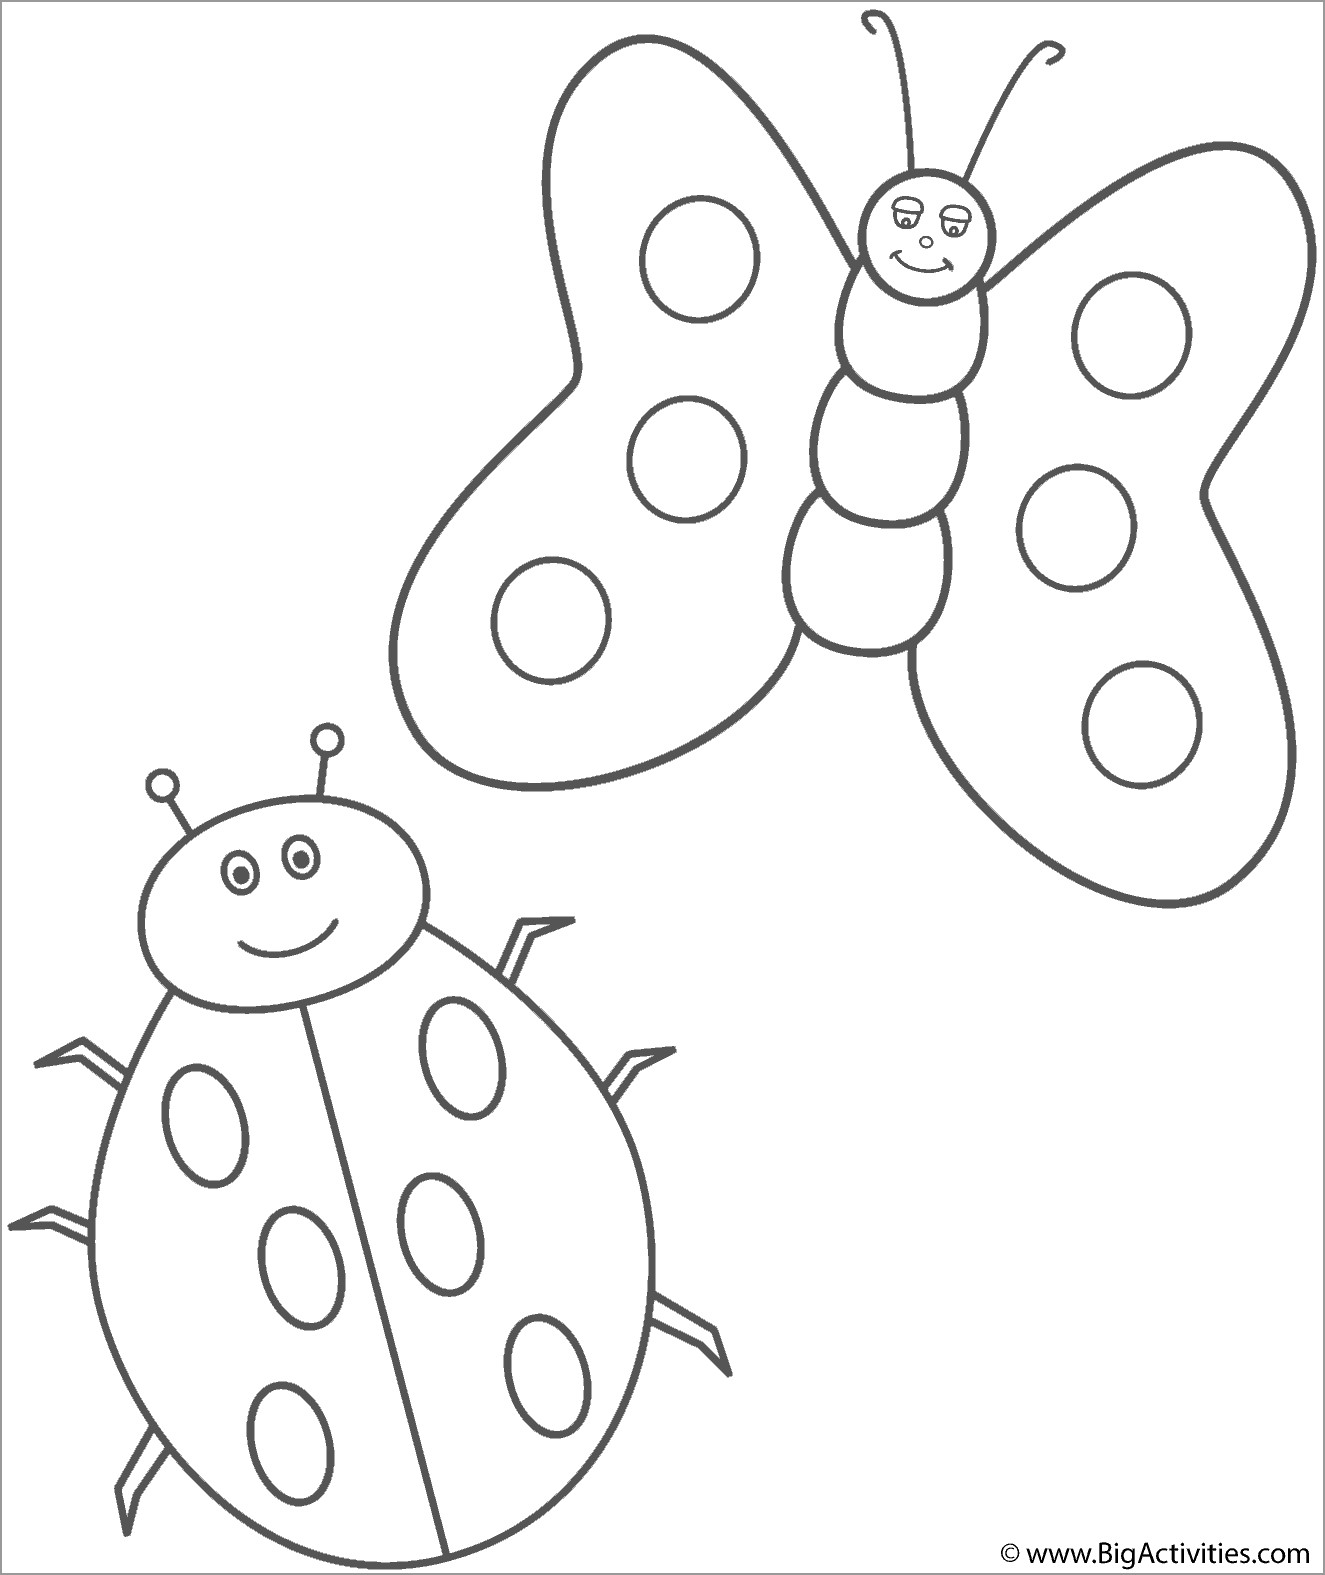 Ladybug and butterfly Coloring Page   ColoringBay